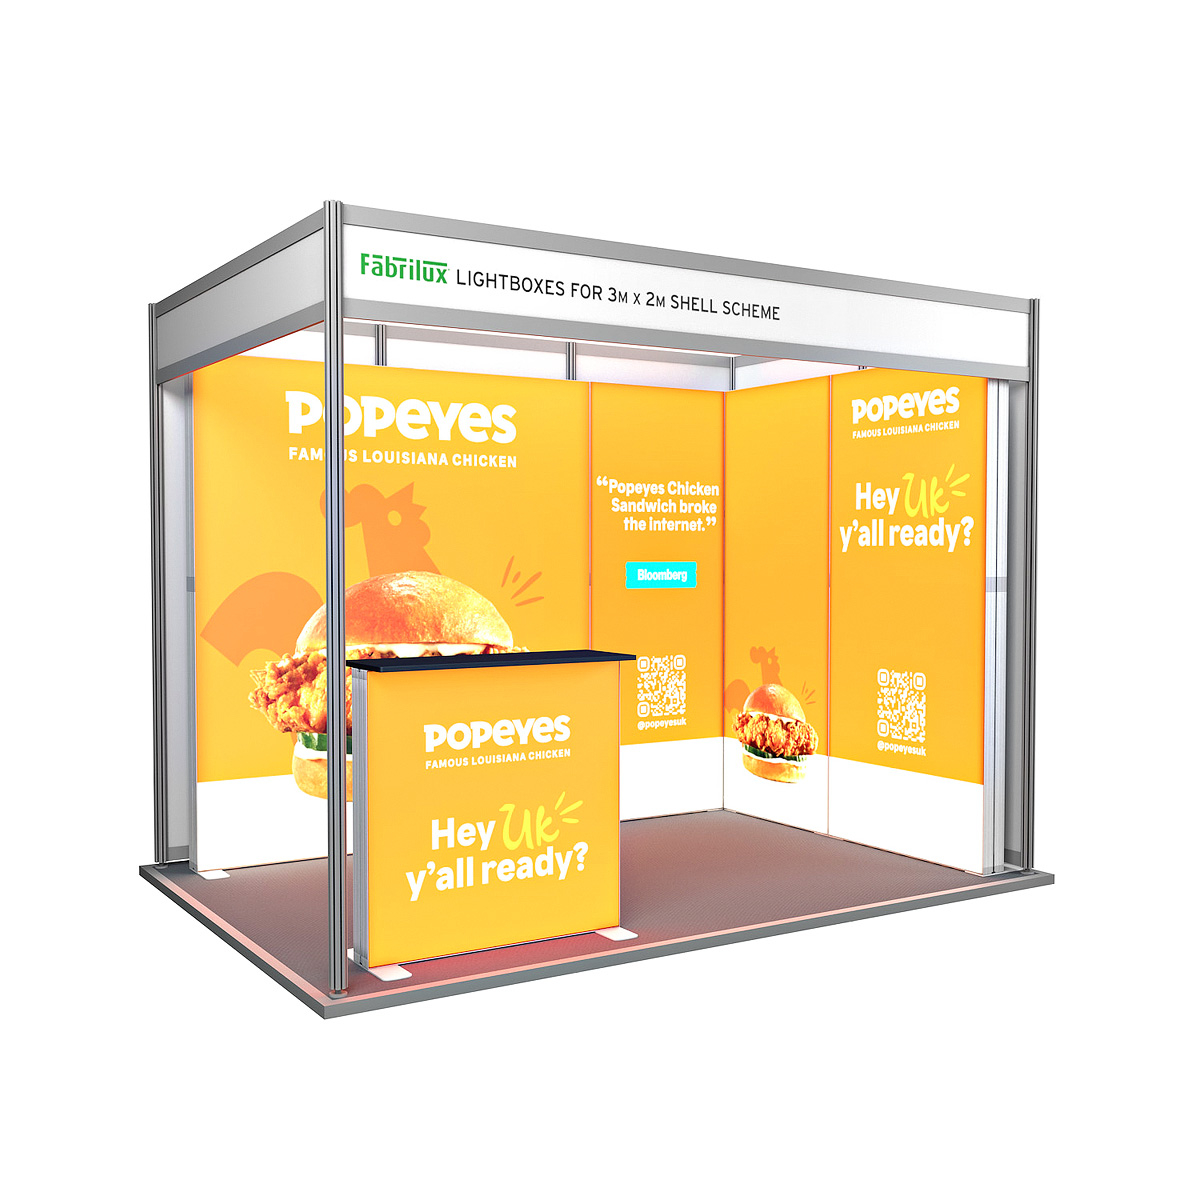 3m x 2m FABRILUX® LED Lightbox Modular Exhibition Stands Shell Scheme